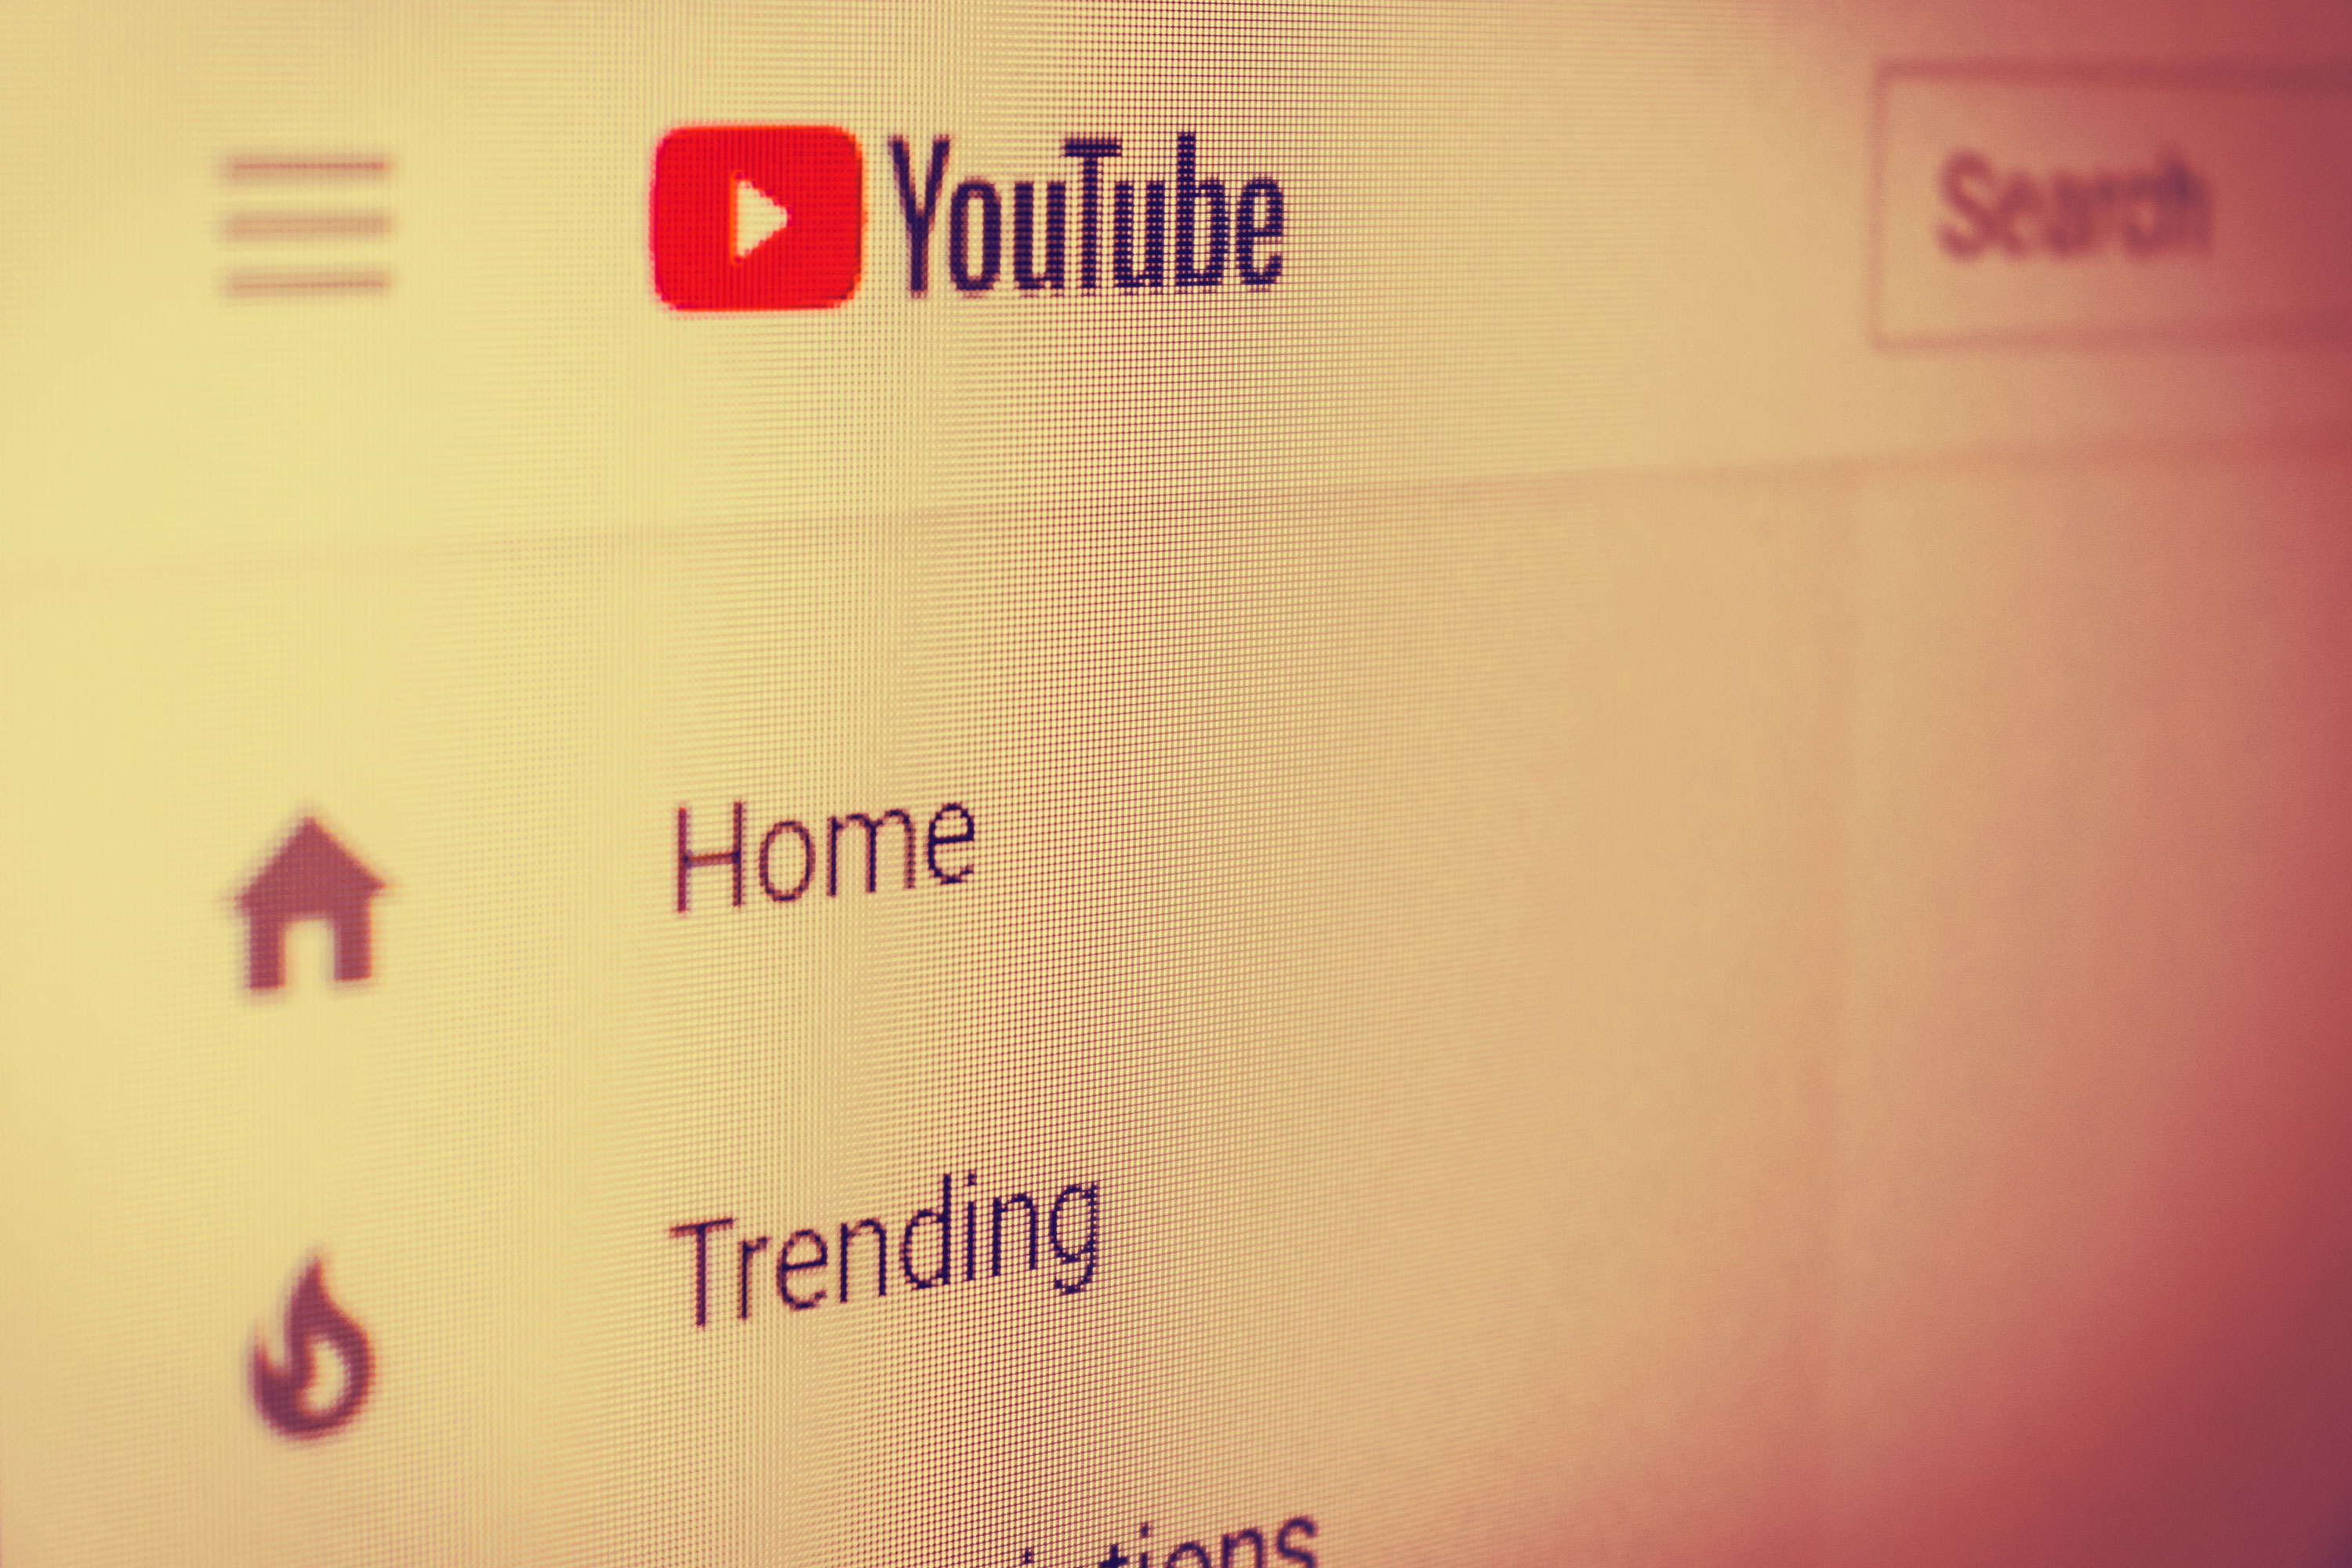 A photo showing part of YouTube&#039;s user interface and logo